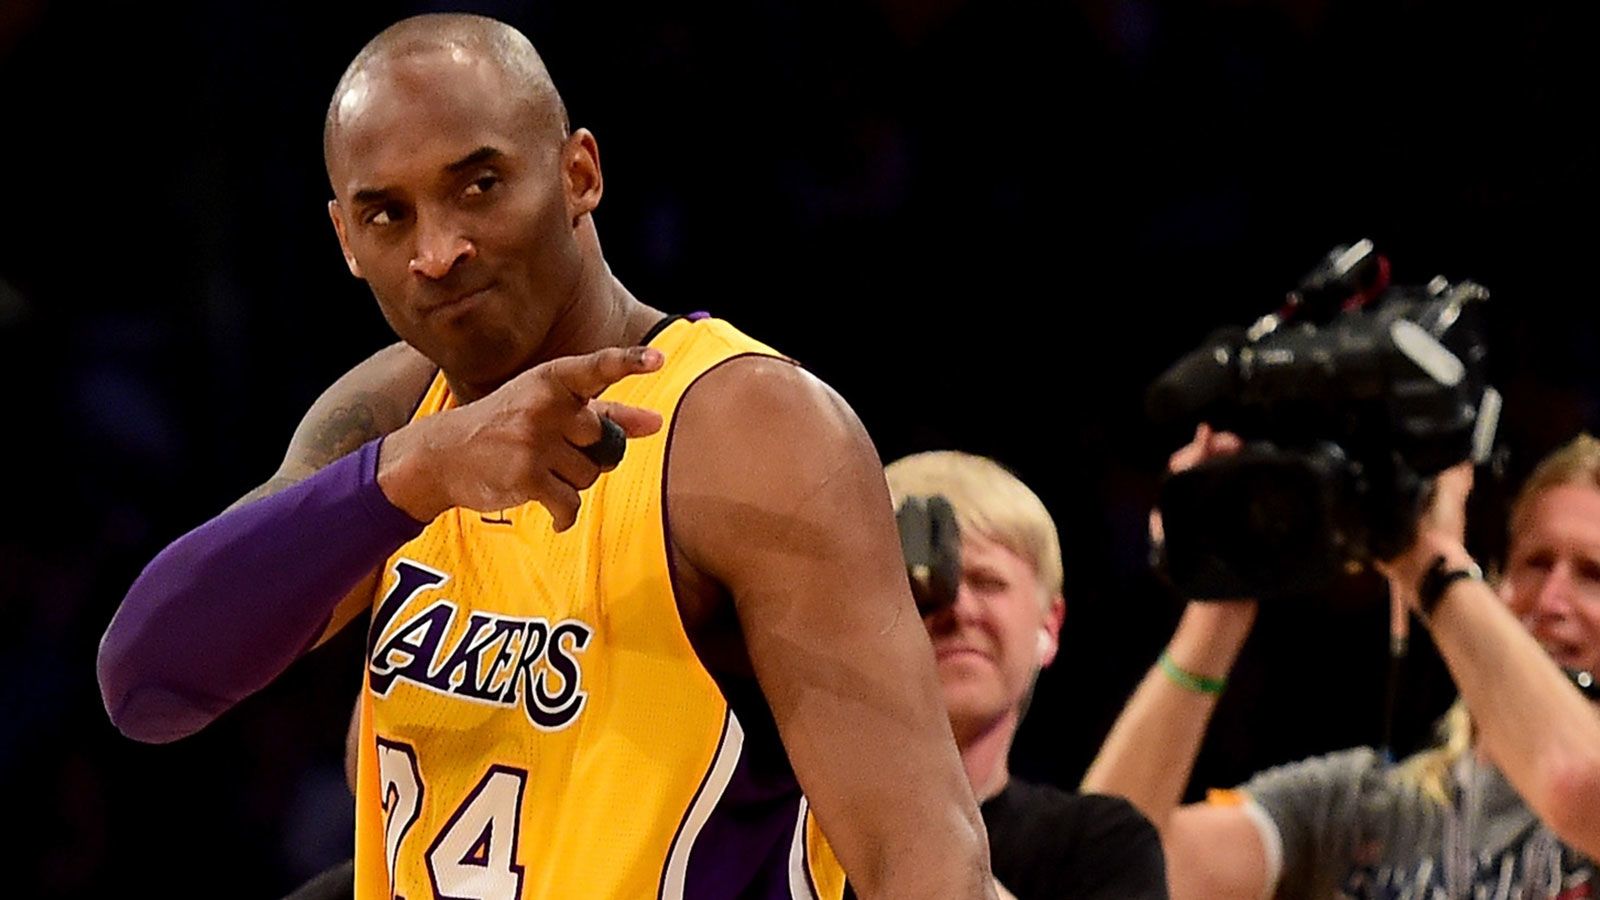 8 Memorable Moments in the Career of Kobe Bryant - HowTheyPlay